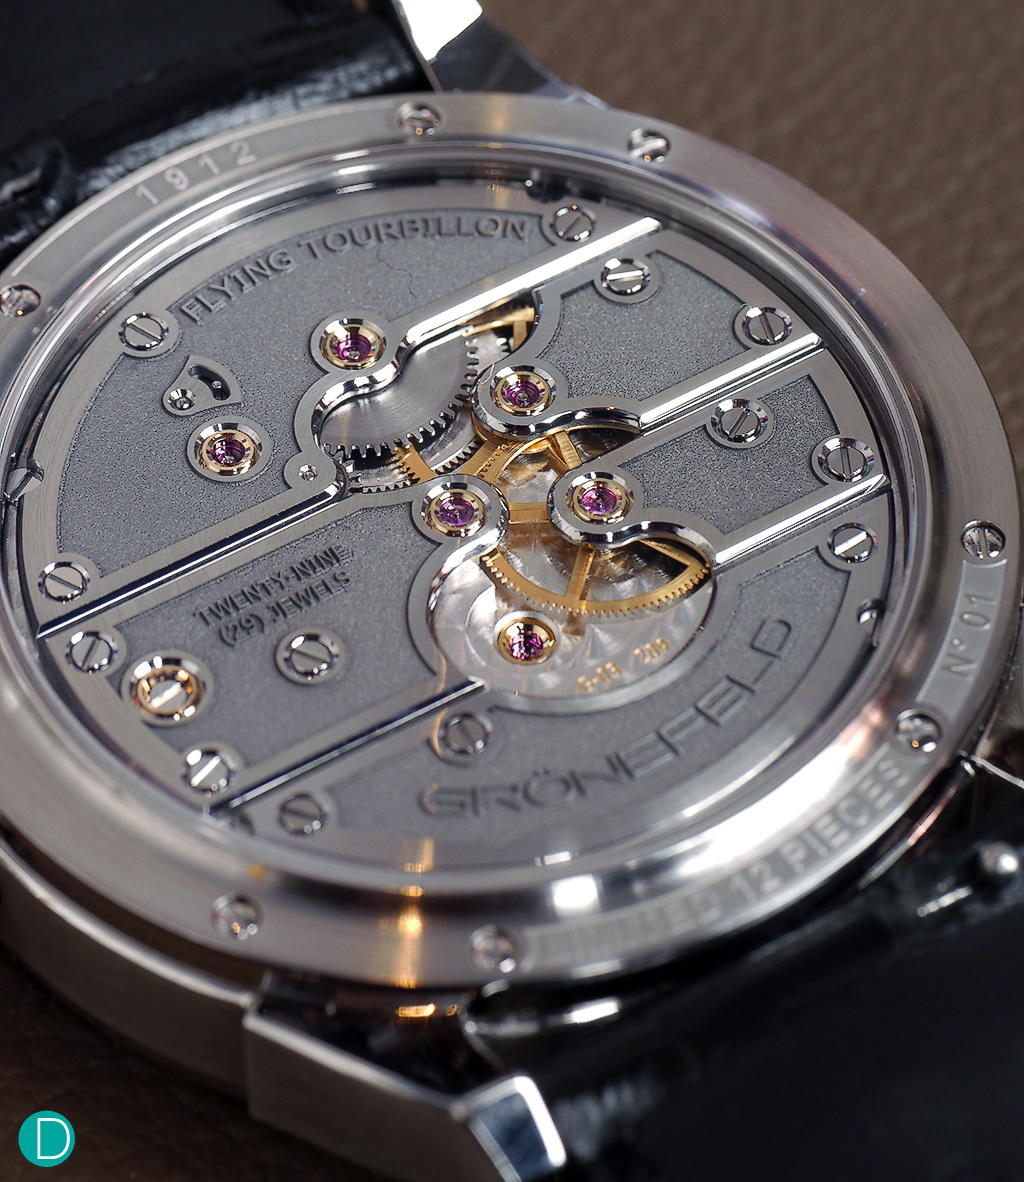 Grönefeld Caliber G-03, beating at 21,600 bph, 72 hours power reserve. Movement plates in stainless steel.